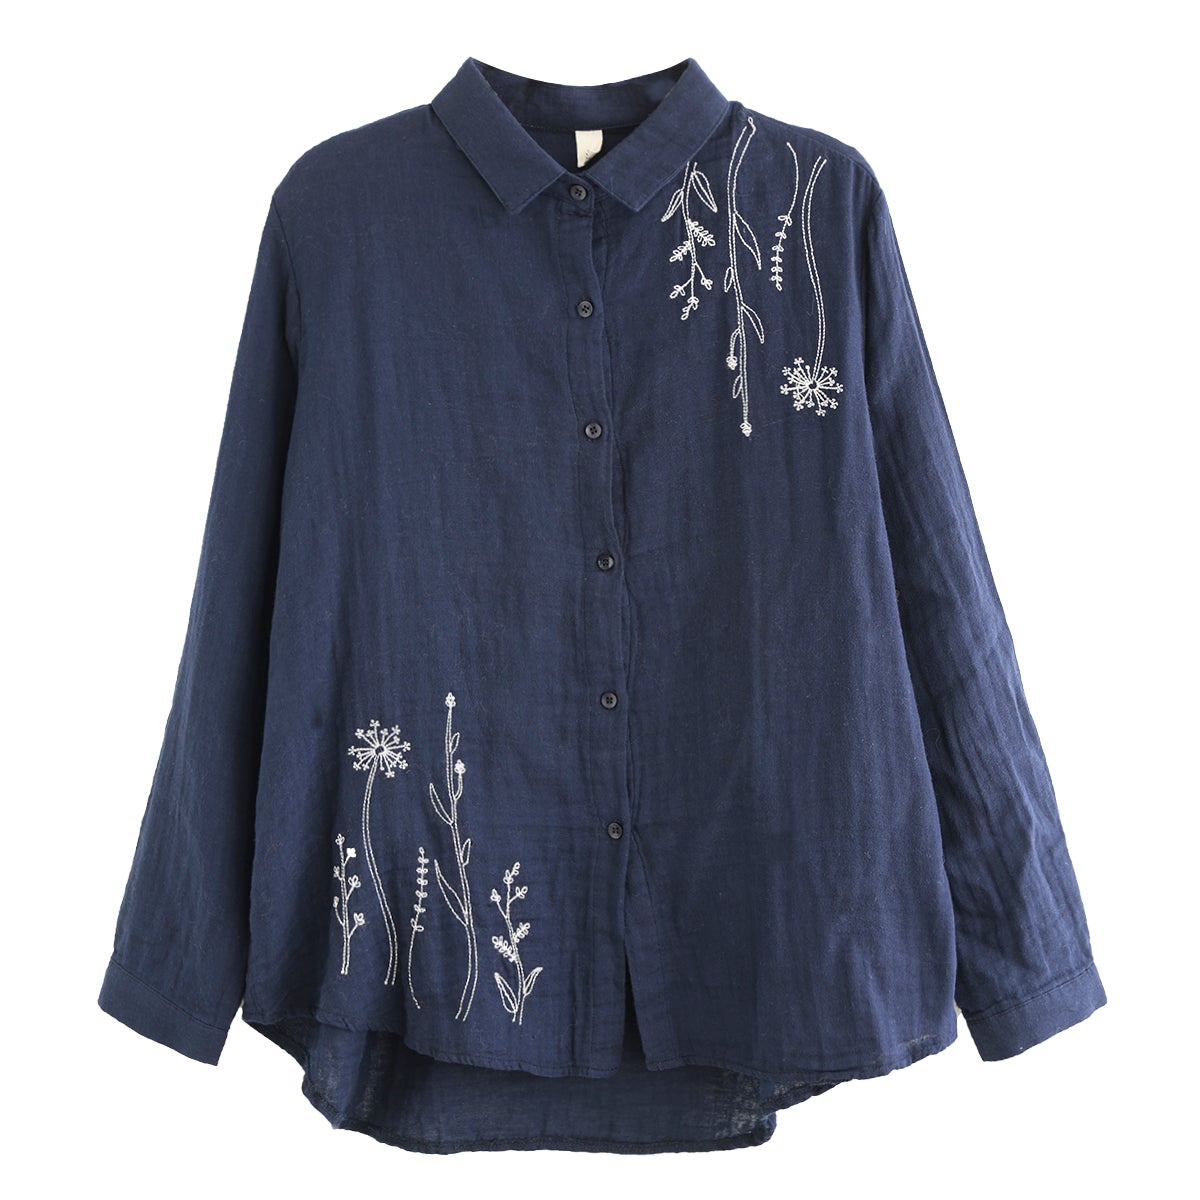 Women Vintage Floral Embroidery Cotton Long Sleeve Blouse